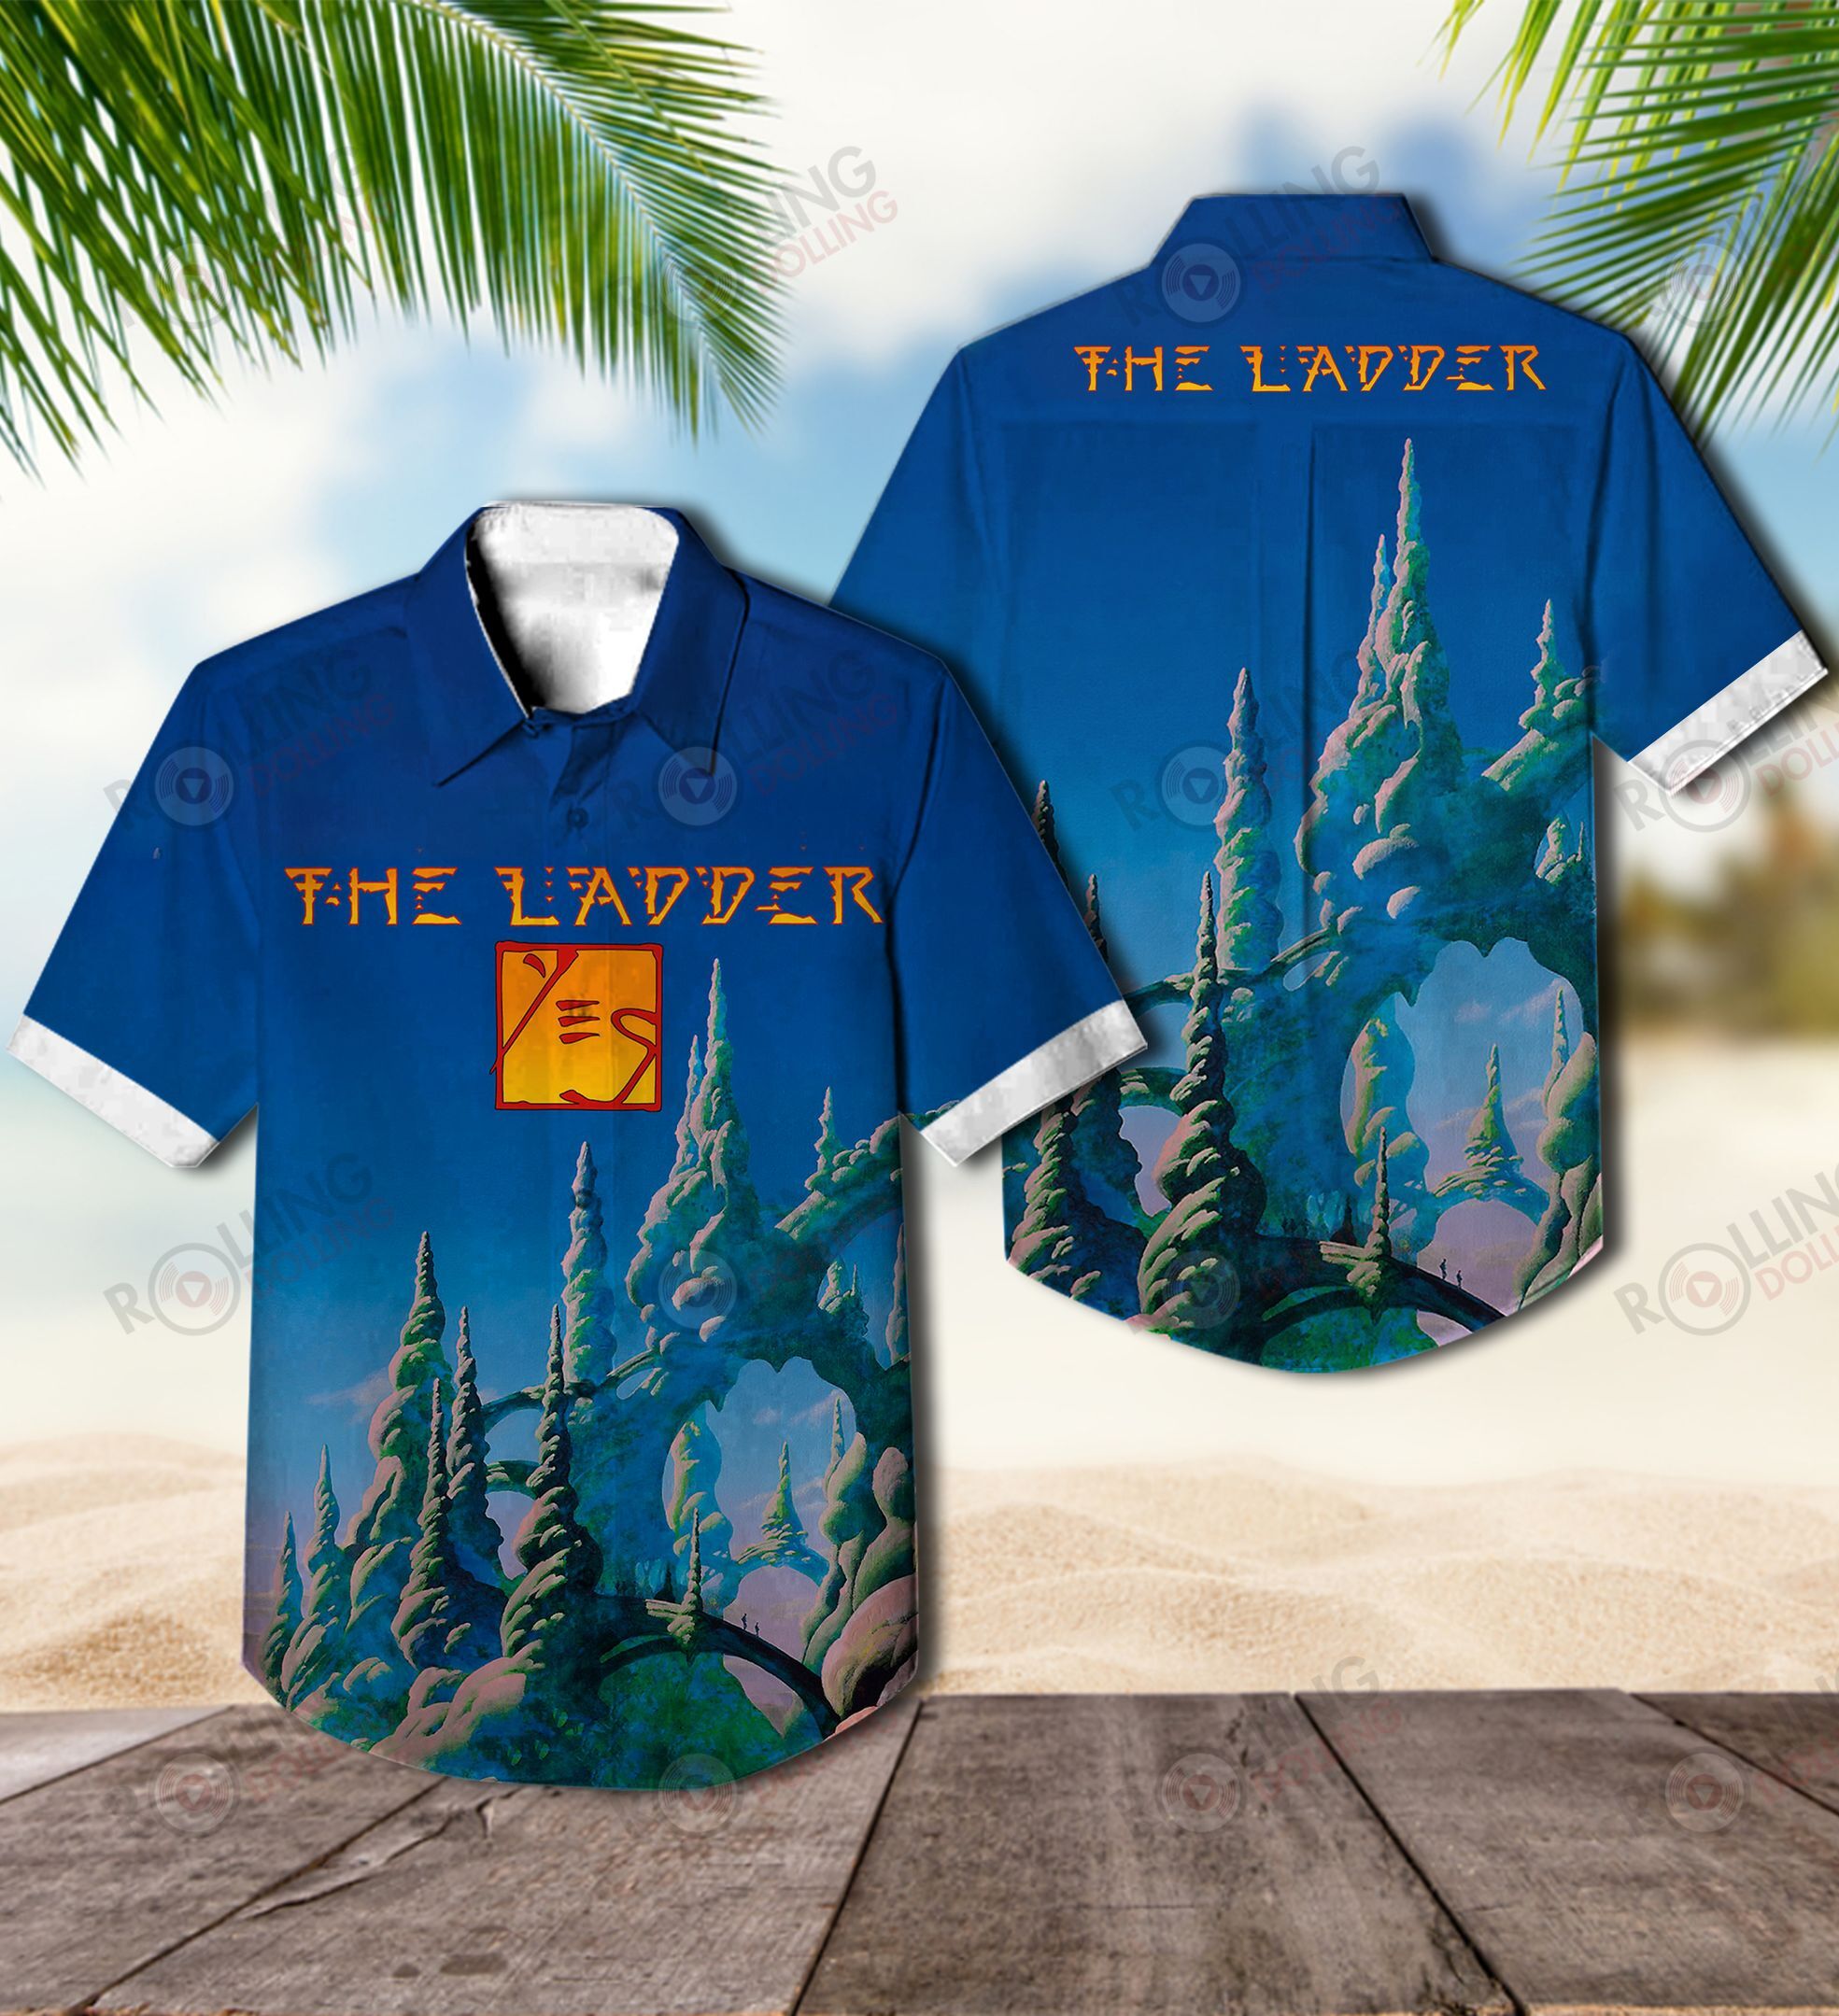 For Summer, Consider Wearing This Amazing Hawaiian Shirt Shirt In Our Store Word3